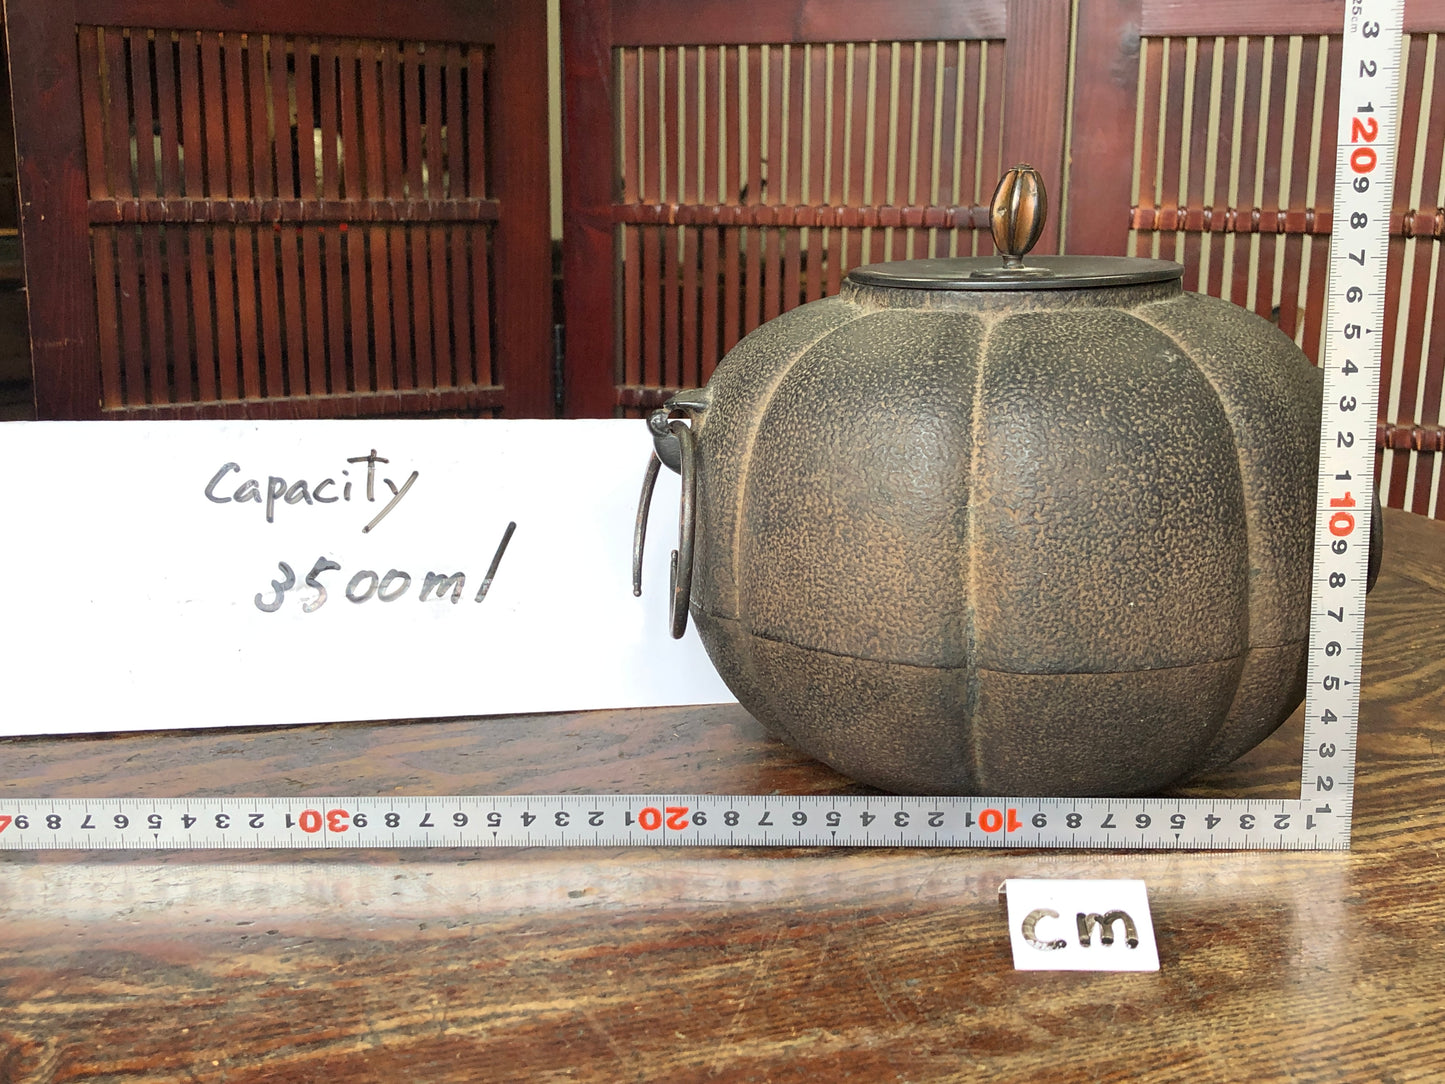 Y3072 CHAGAMA Iron Pumpkin water pot container Japanese Tea Ceremony teapot